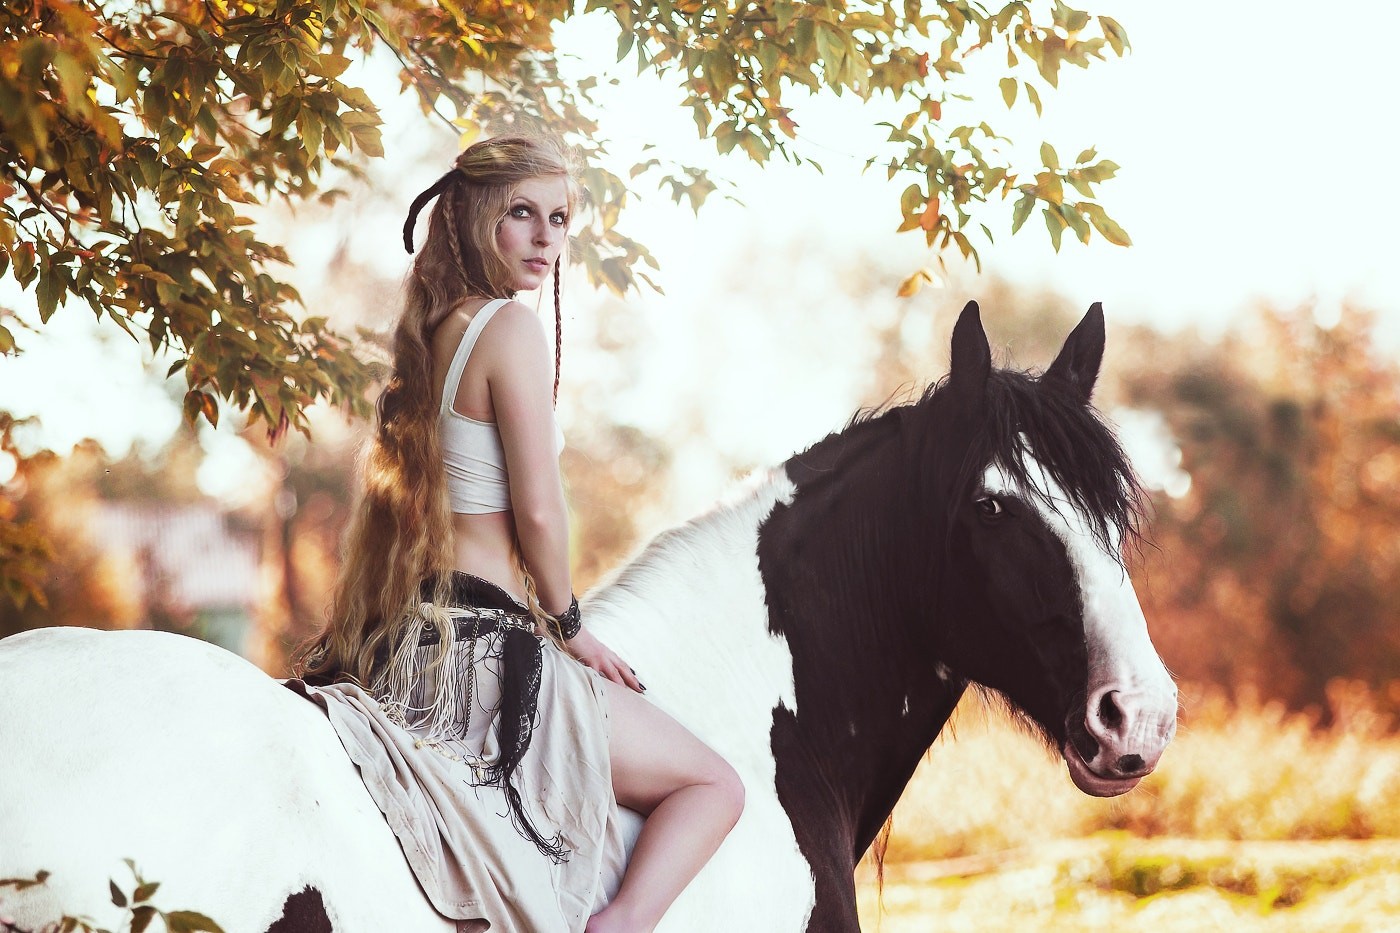 People 1400x933 Anna Sychowicz fantasy girl horse animals women women outdoors model 500px blonde